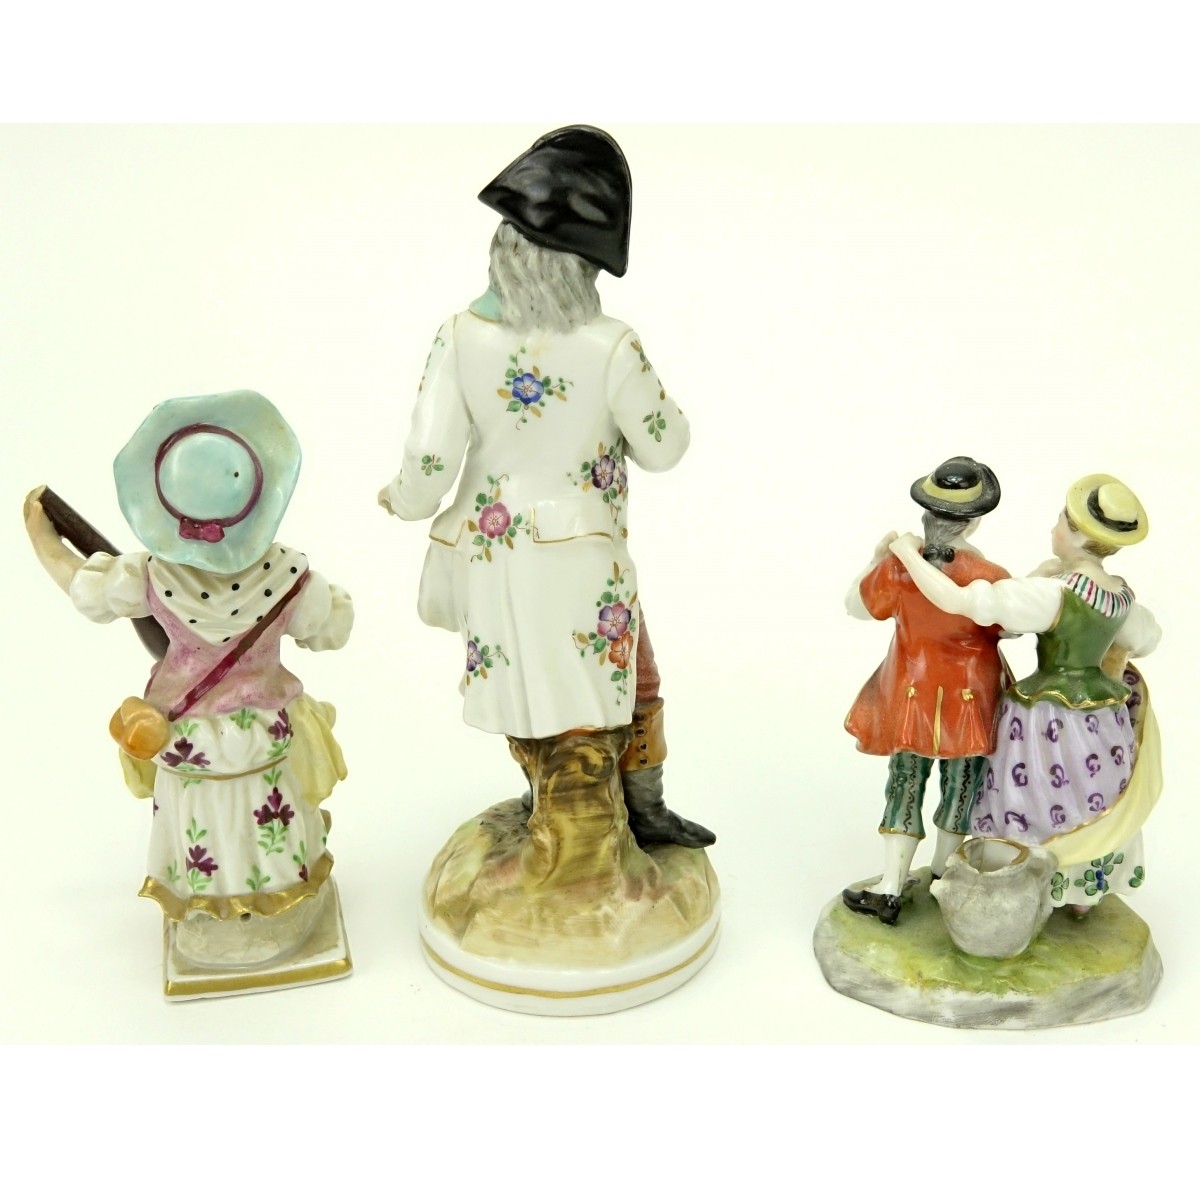 Grouping of Three (3) Antique Porcelain Figurines